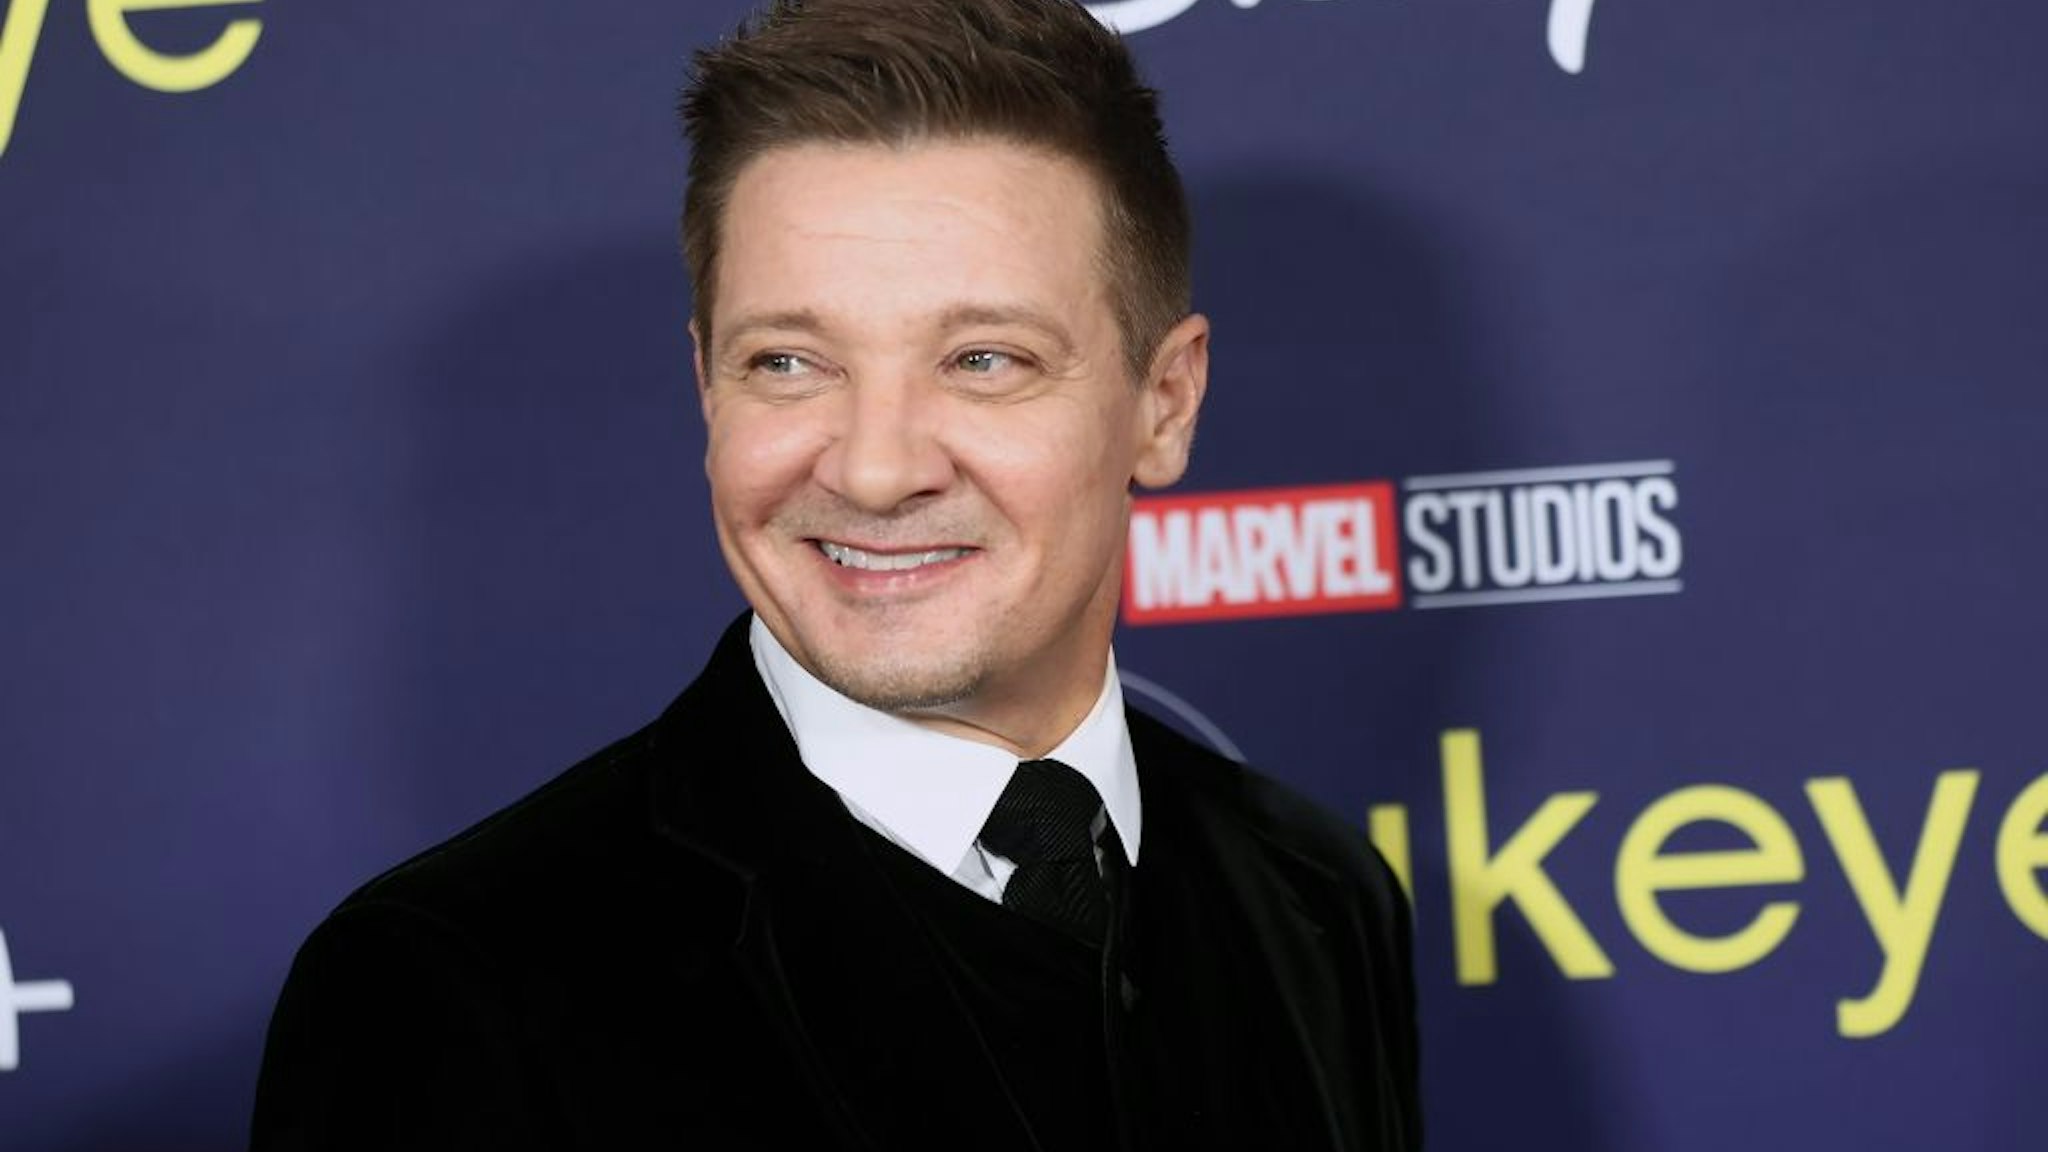 LOS ANGELES, CALIFORNIA - NOVEMBER 17: Jeremy Renner attends the Marvel Studios' Los Angeles Premiere of "Hawkeye" at El Capitan Theatre on November 17, 2021 in Los Angeles, California. (Photo by Matt Winkelmeyer/Getty Images)